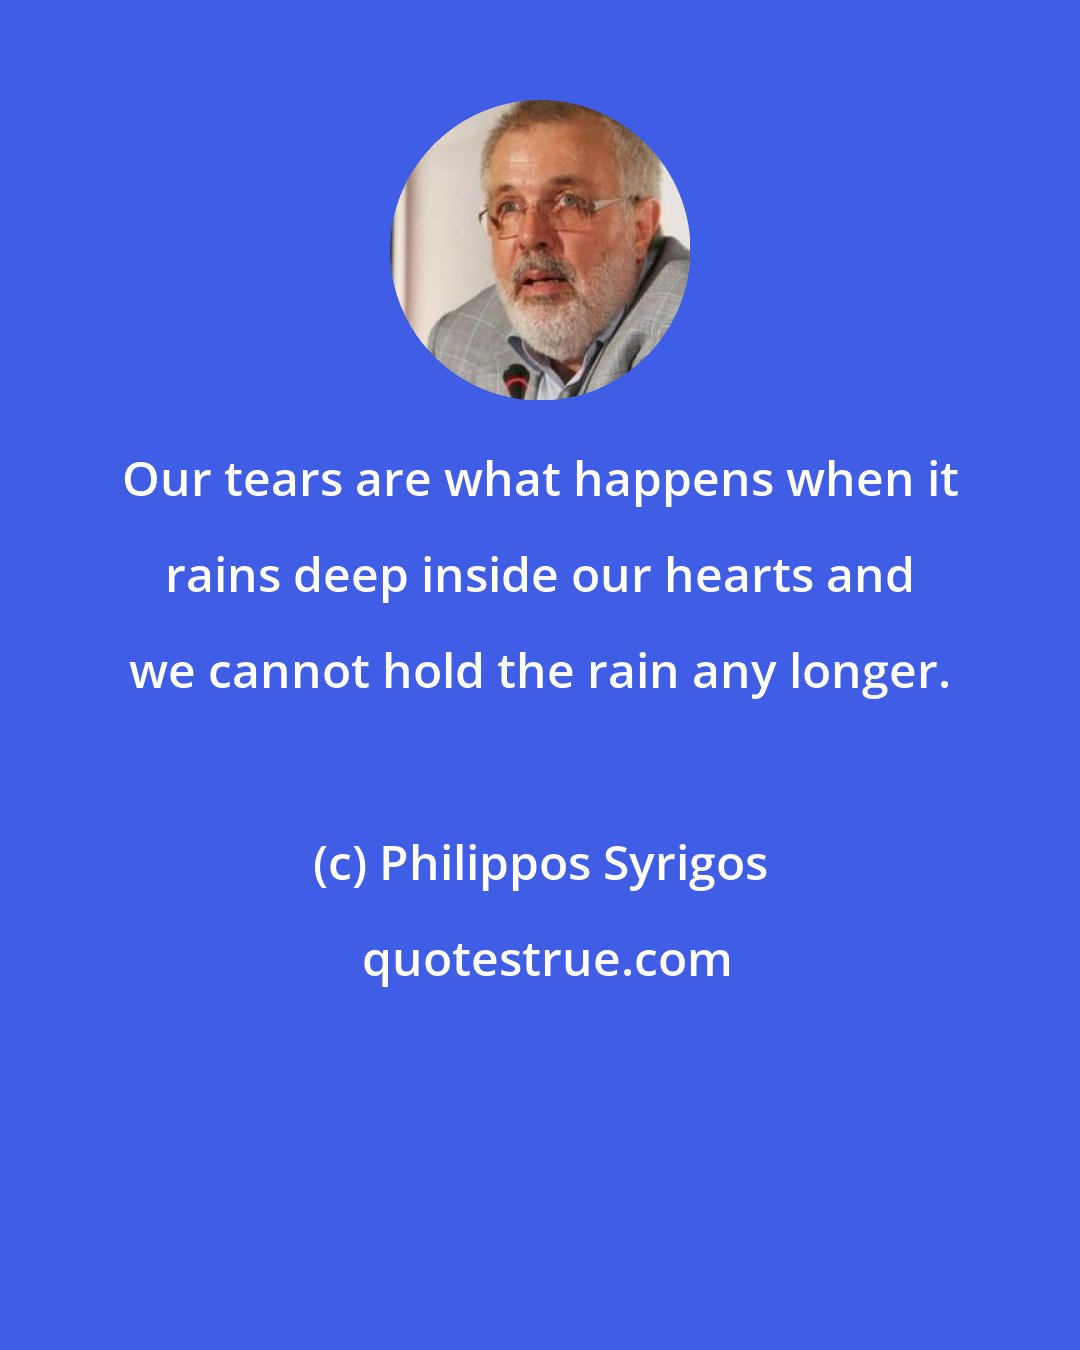 Philippos Syrigos: Our tears are what happens when it rains deep inside our hearts and we cannot hold the rain any longer.